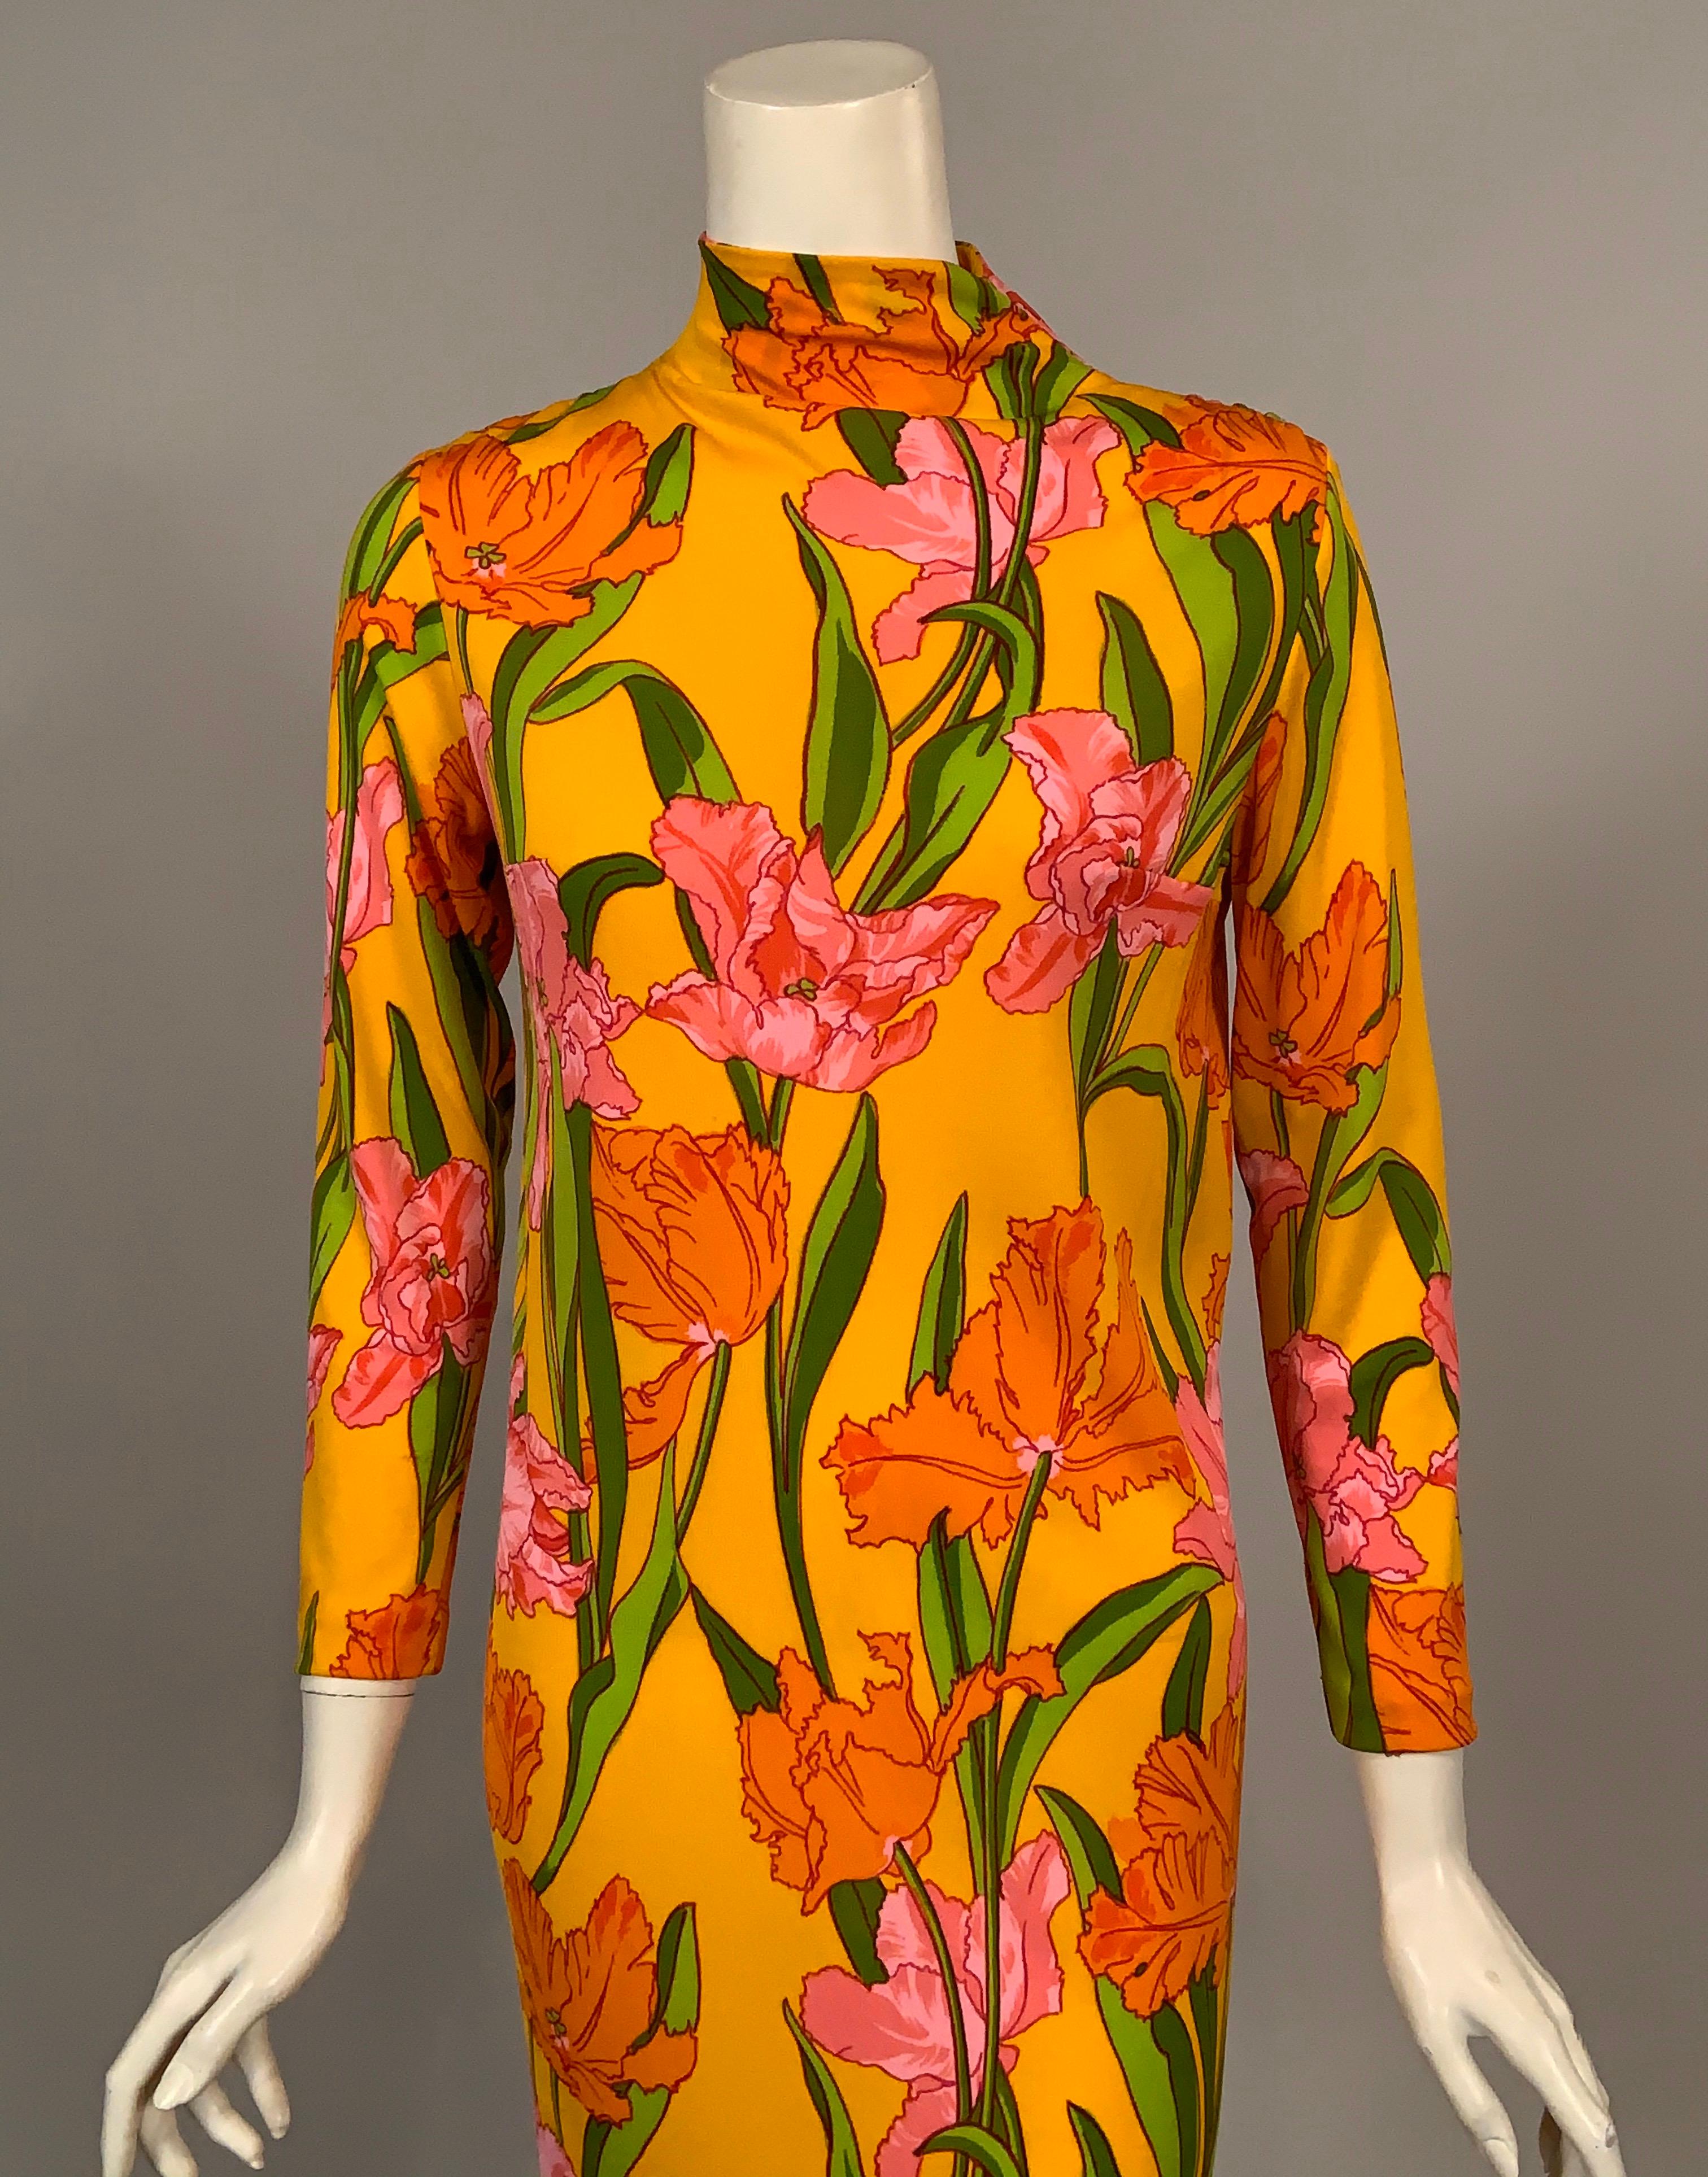 La Mendola has given us a bright and cheerful design of pink and orange Parrot Tulips with Spring green stems is striking against a sunny yellow background. The dress is made from silk jersey a high neckline, long sleeves a matching tie belt and